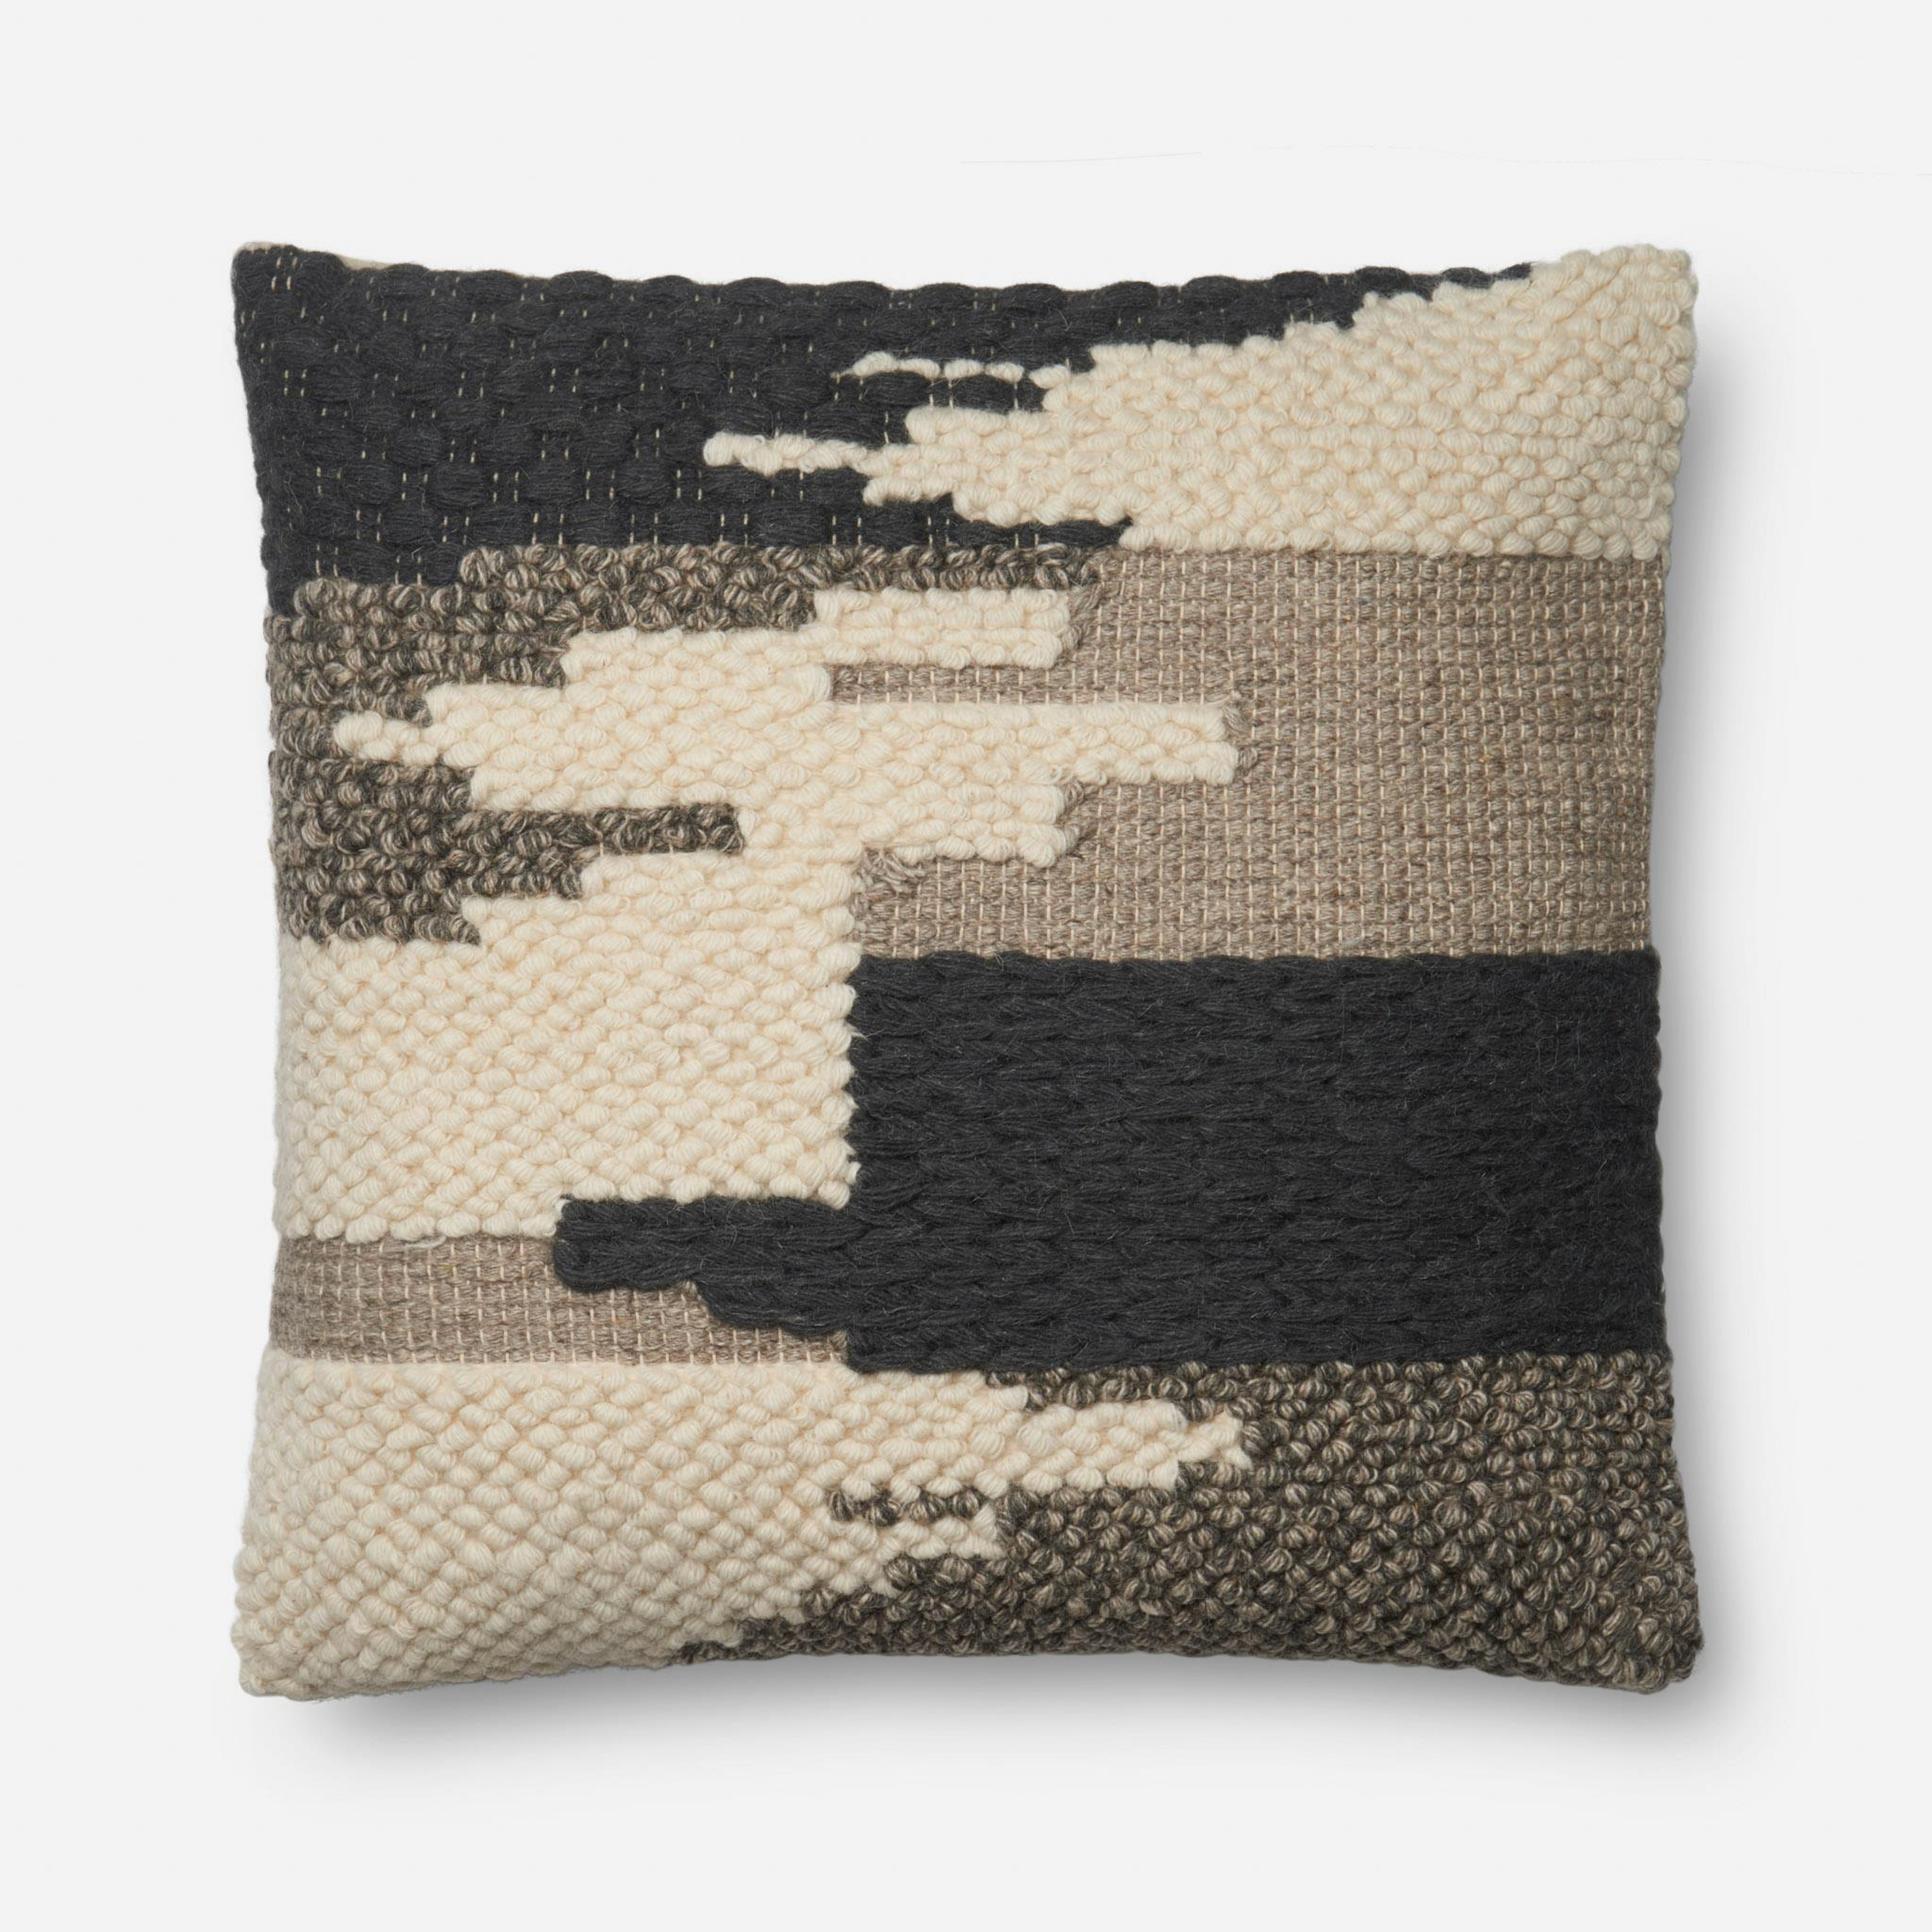 PILLOWS - BLACK - Magnolia Home by Joana Gaines Crafted by Loloi Rugs